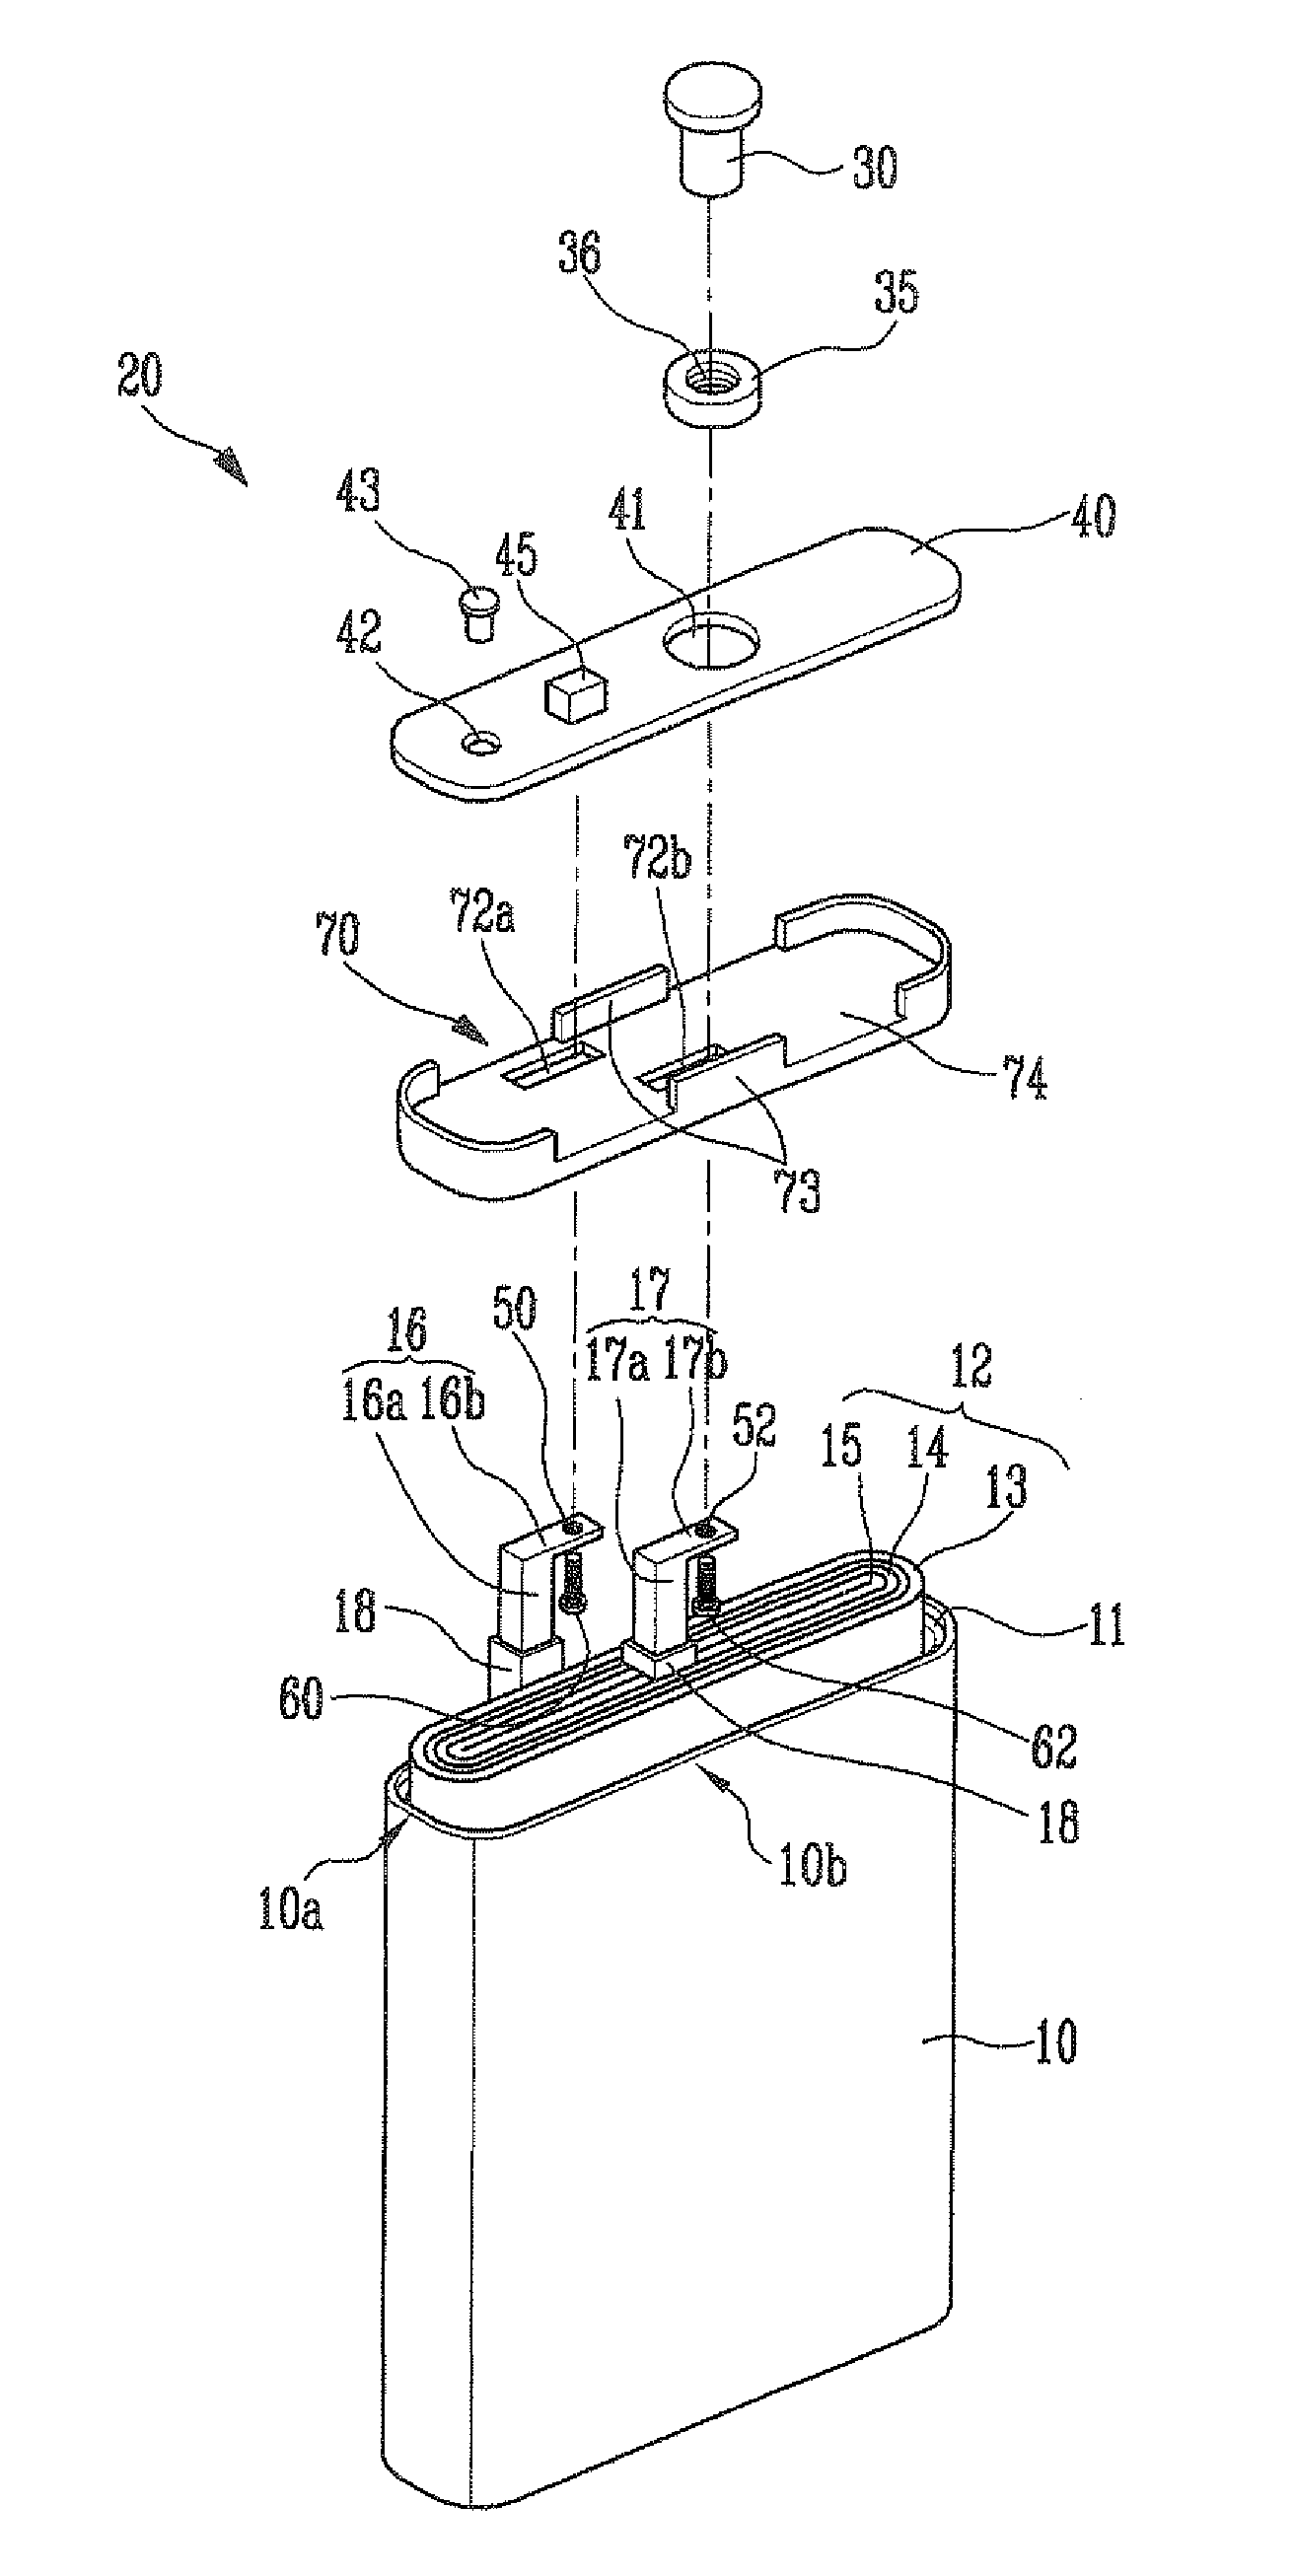 Secondary Battery Having Interconnected Positive and Negative Electrode Tabs